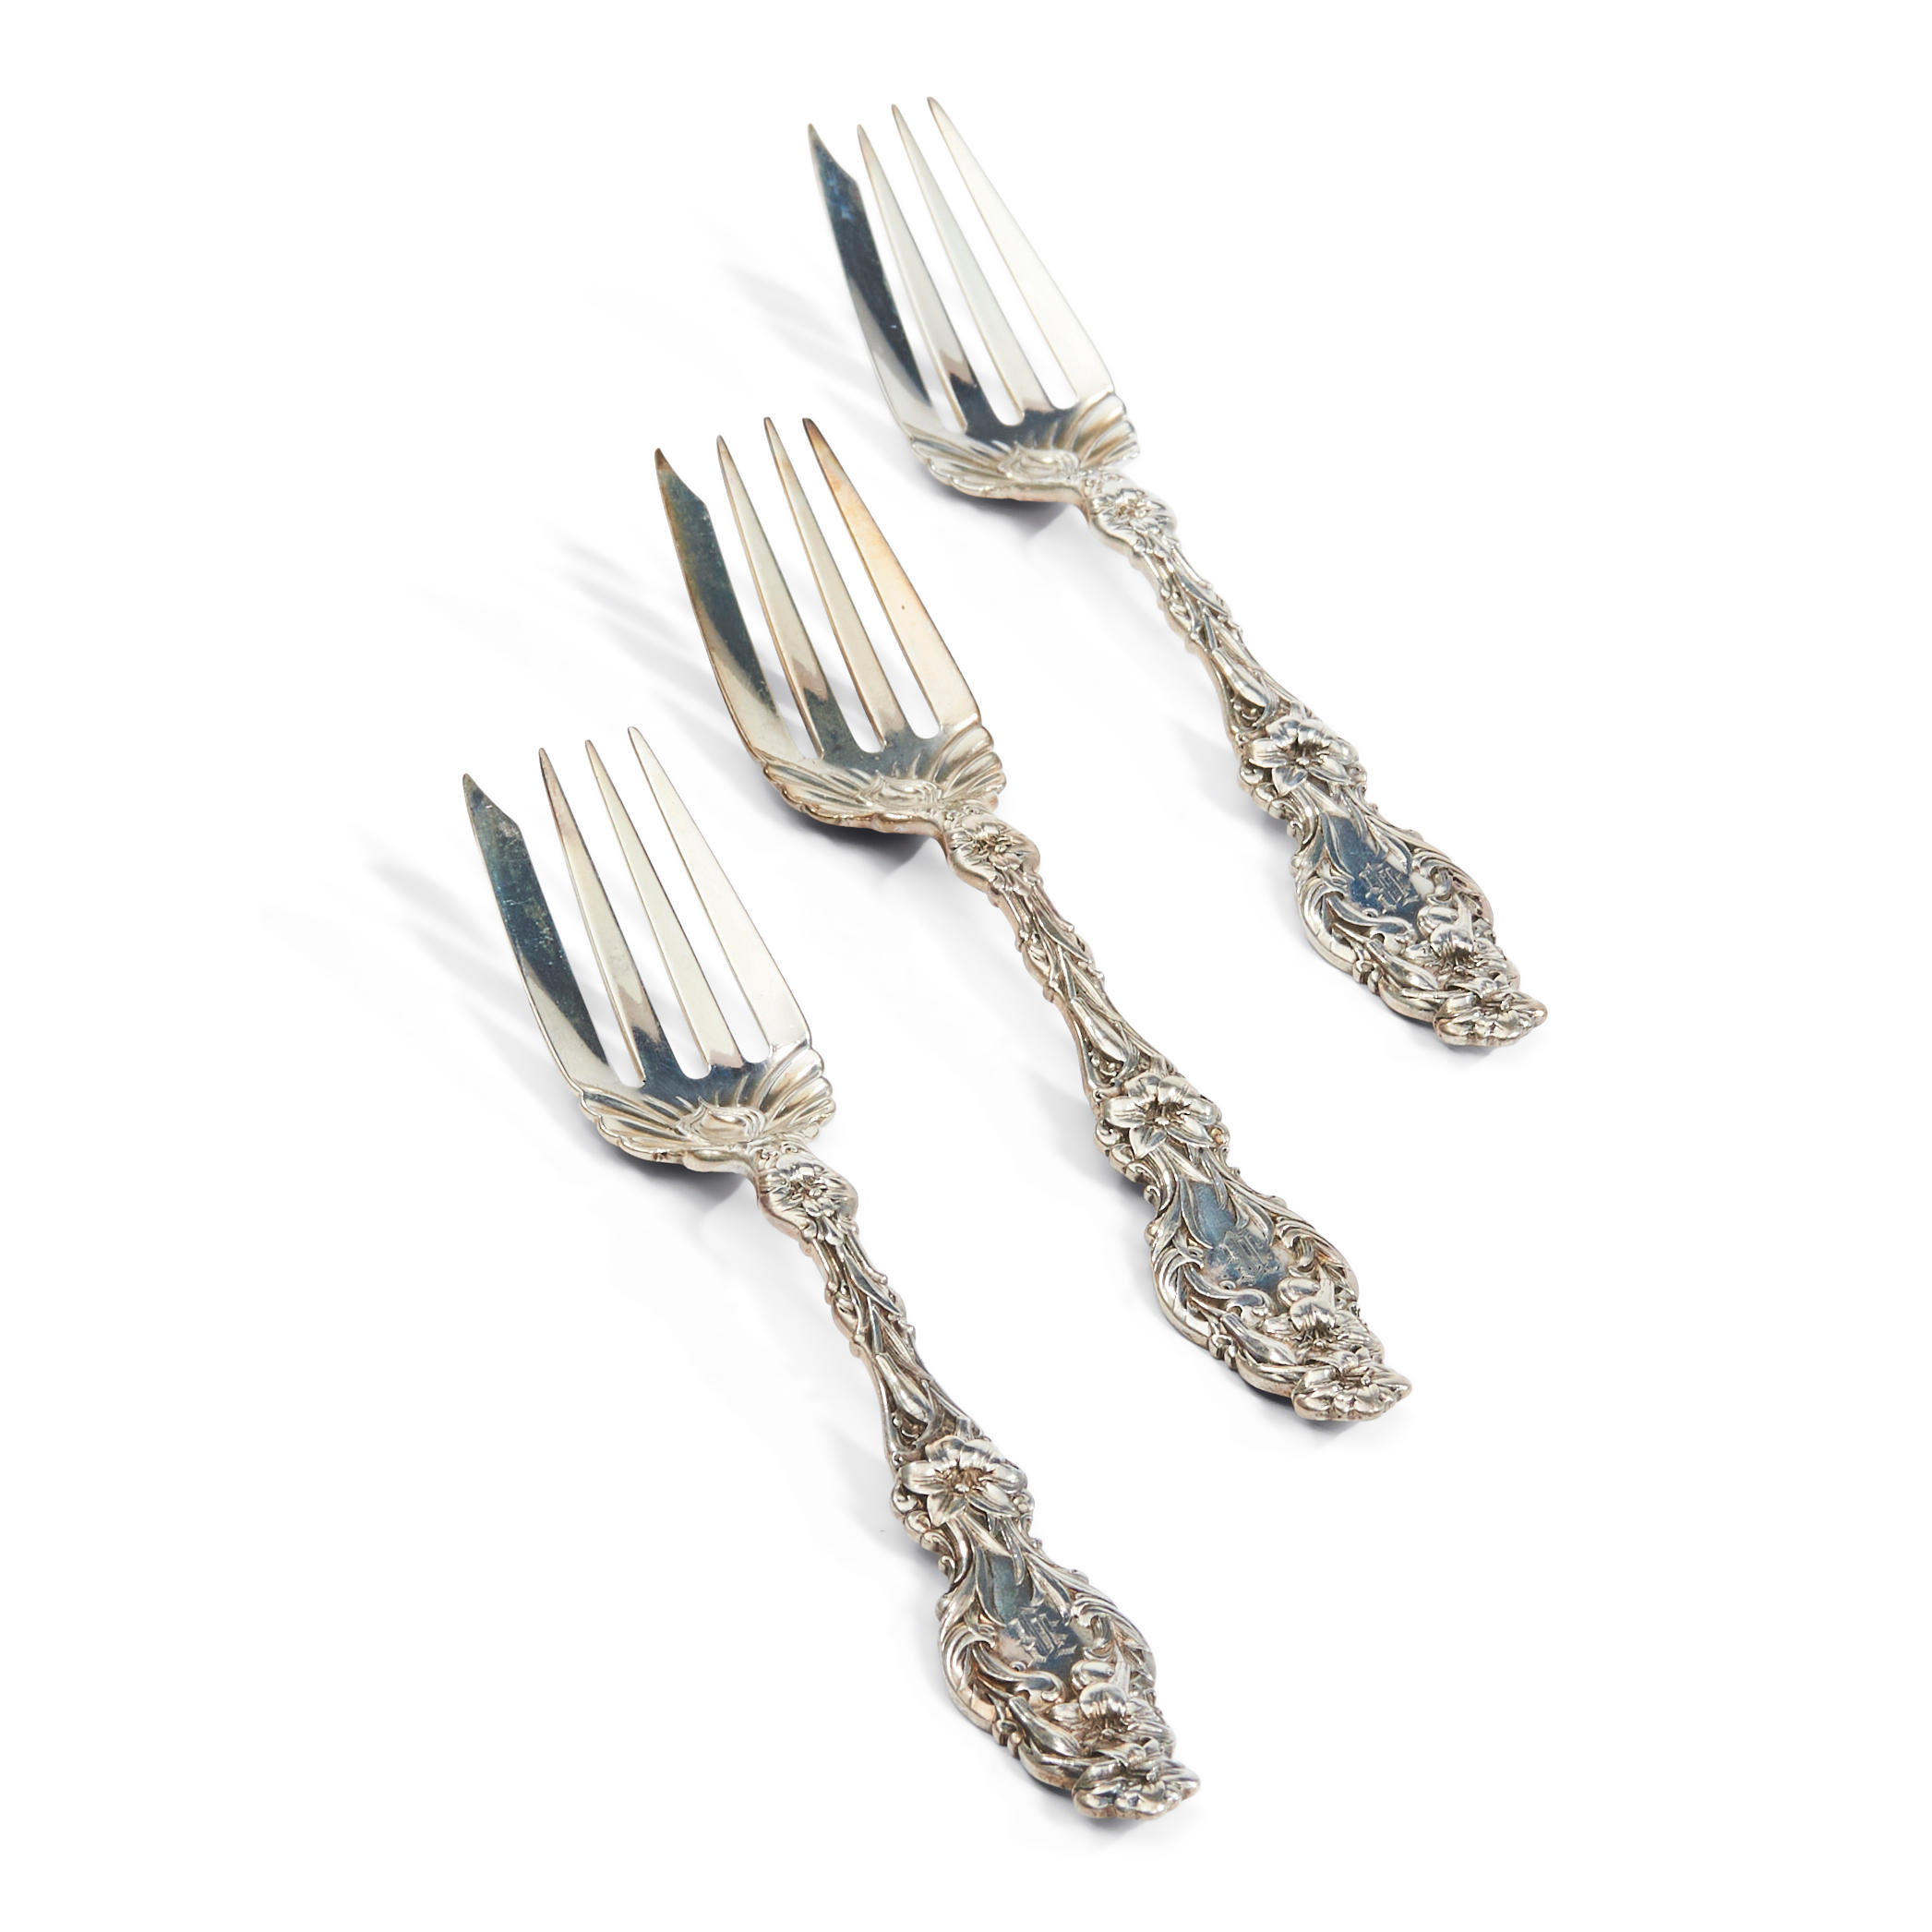 TEN WHITING "LILY PATTERN" STERLING